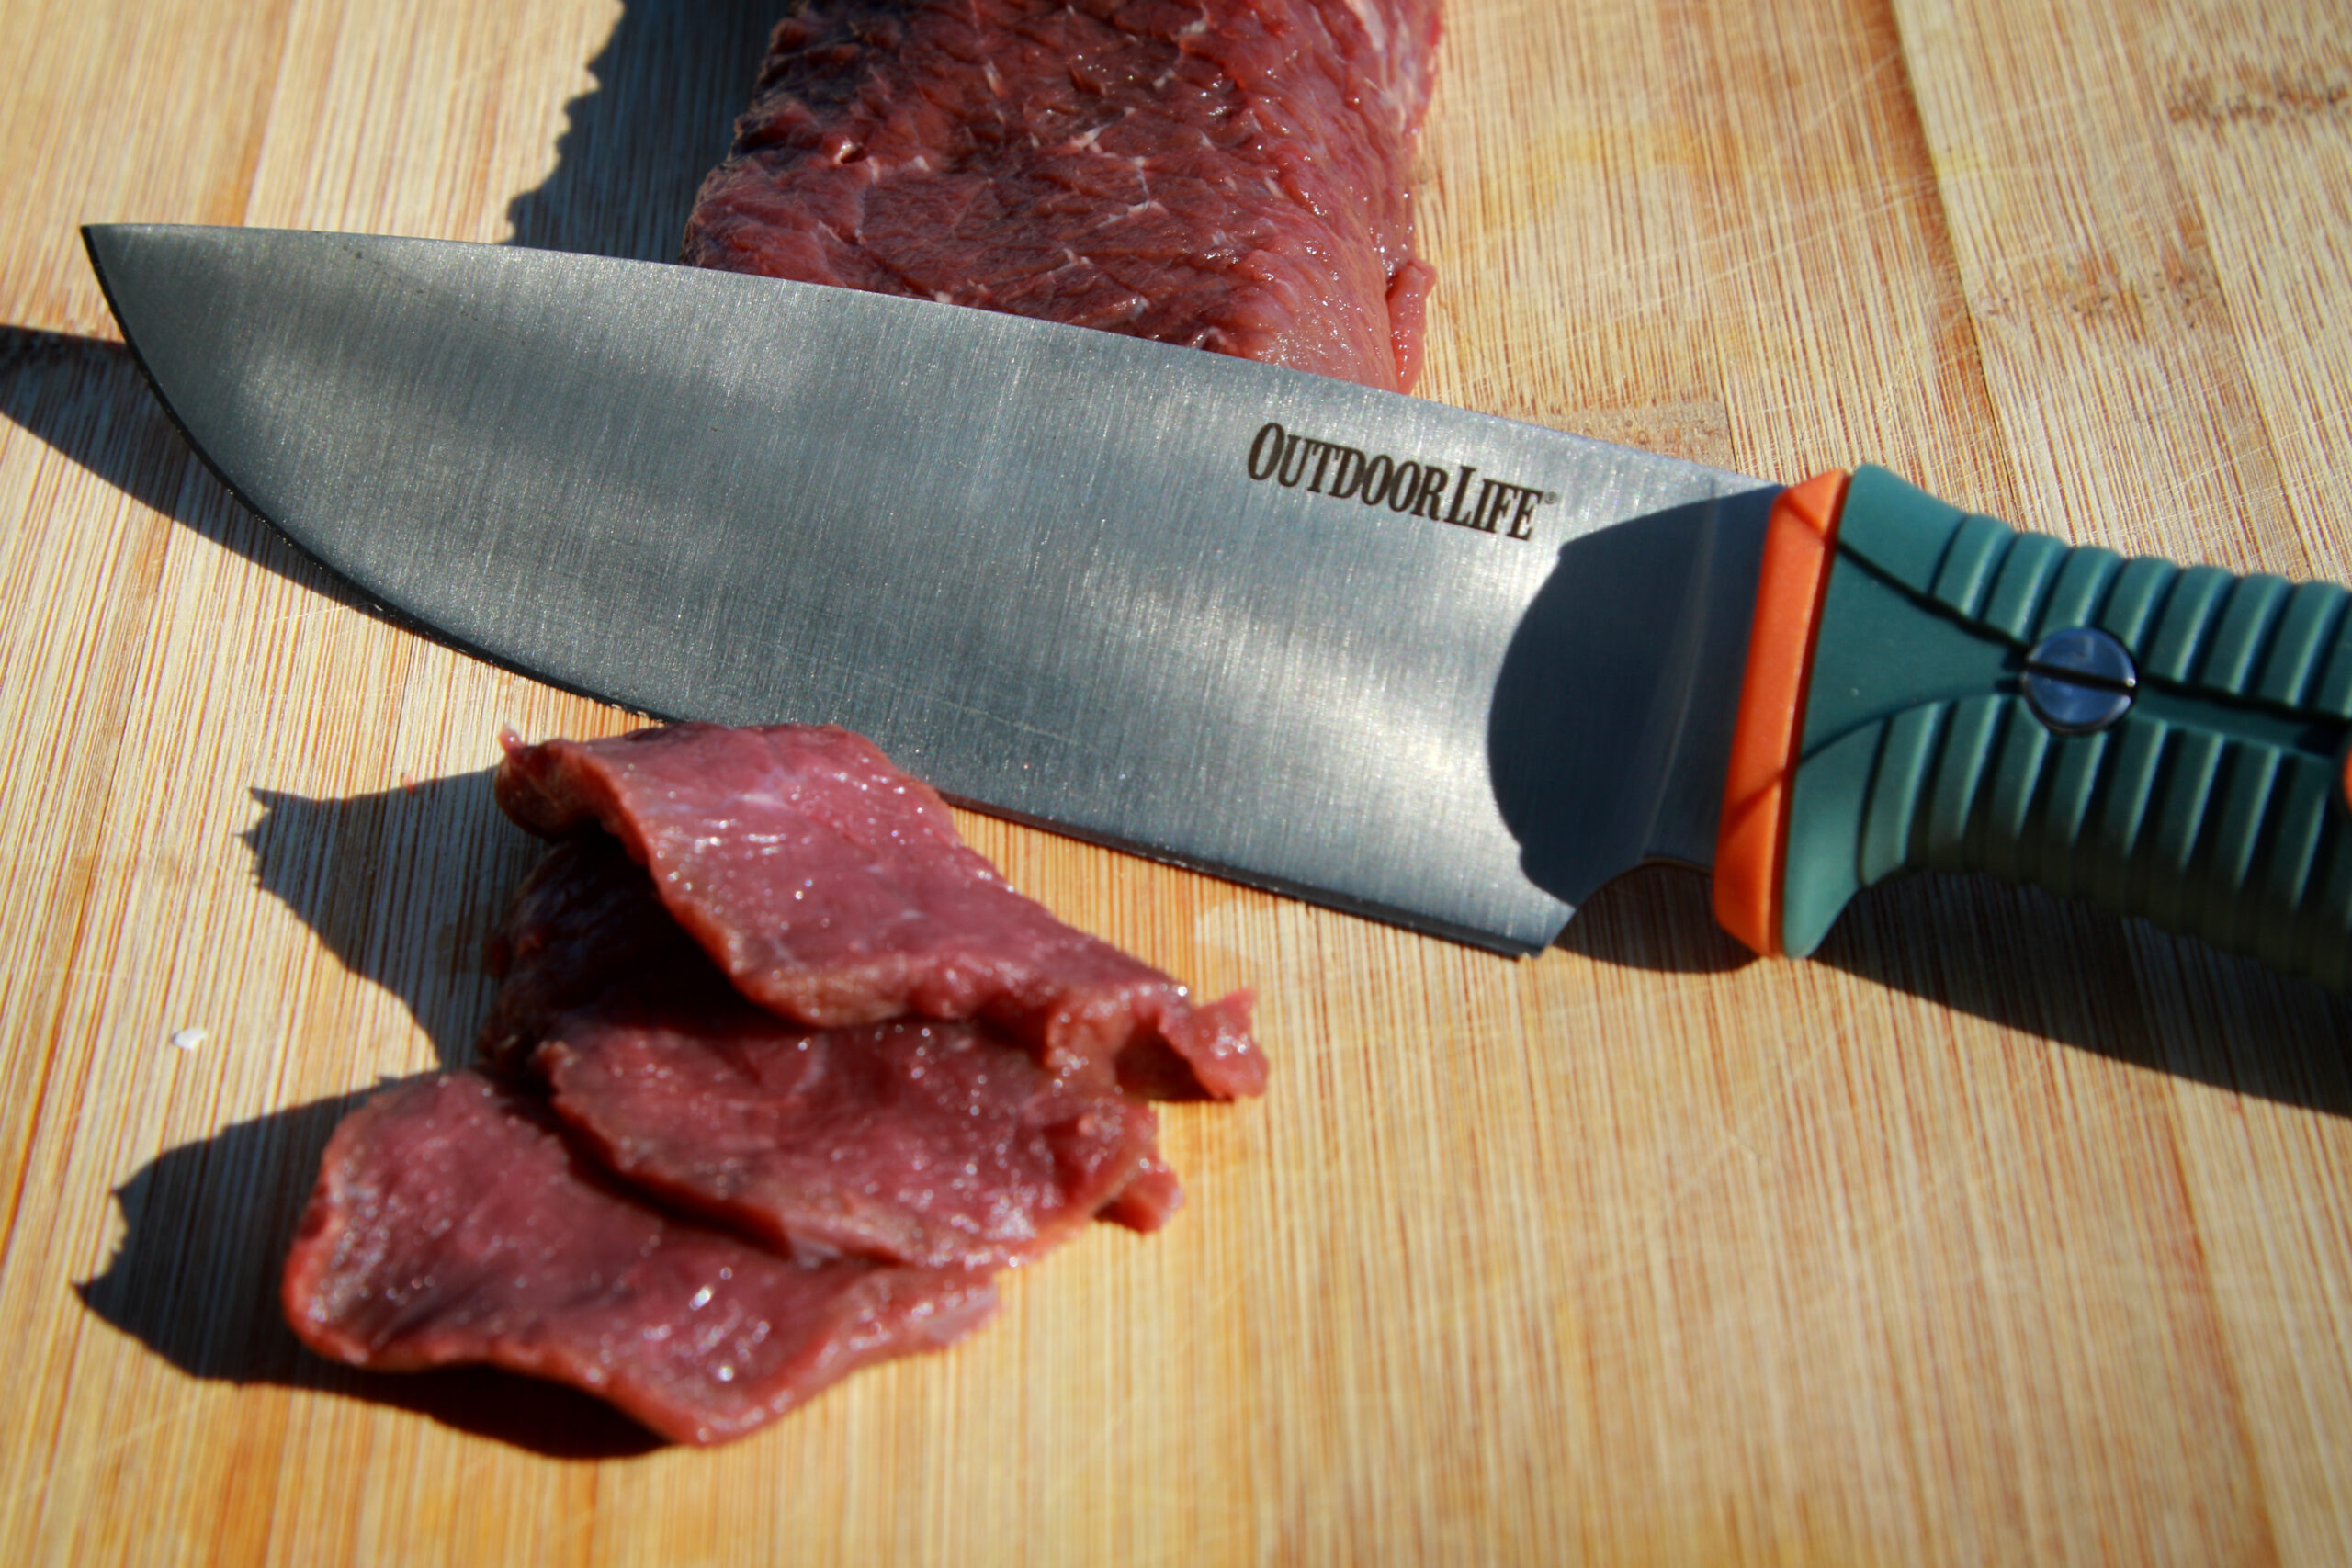 An Outdoor Life chef's knife with venison on a wooden cutting board.